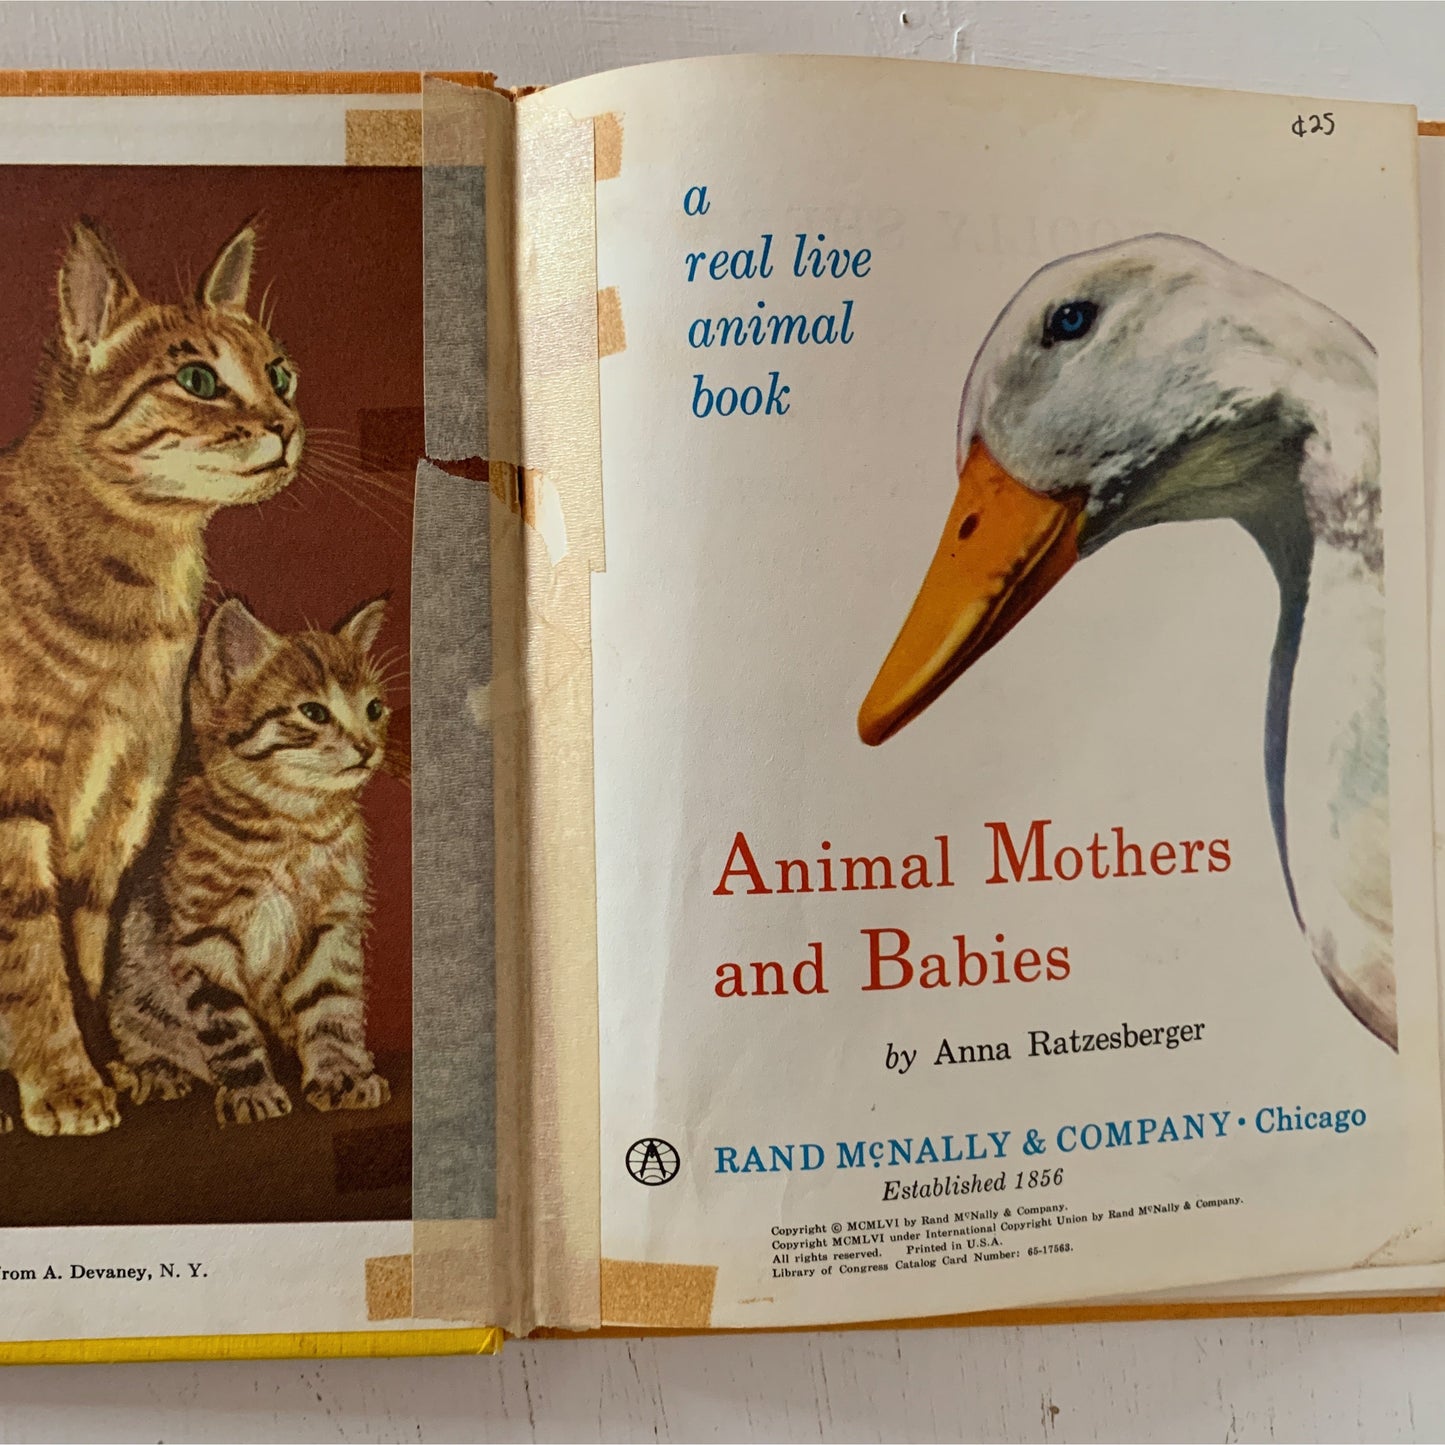 Animal Mothers and Babies, A Rand McNally Super Book, Hardcover, 1956